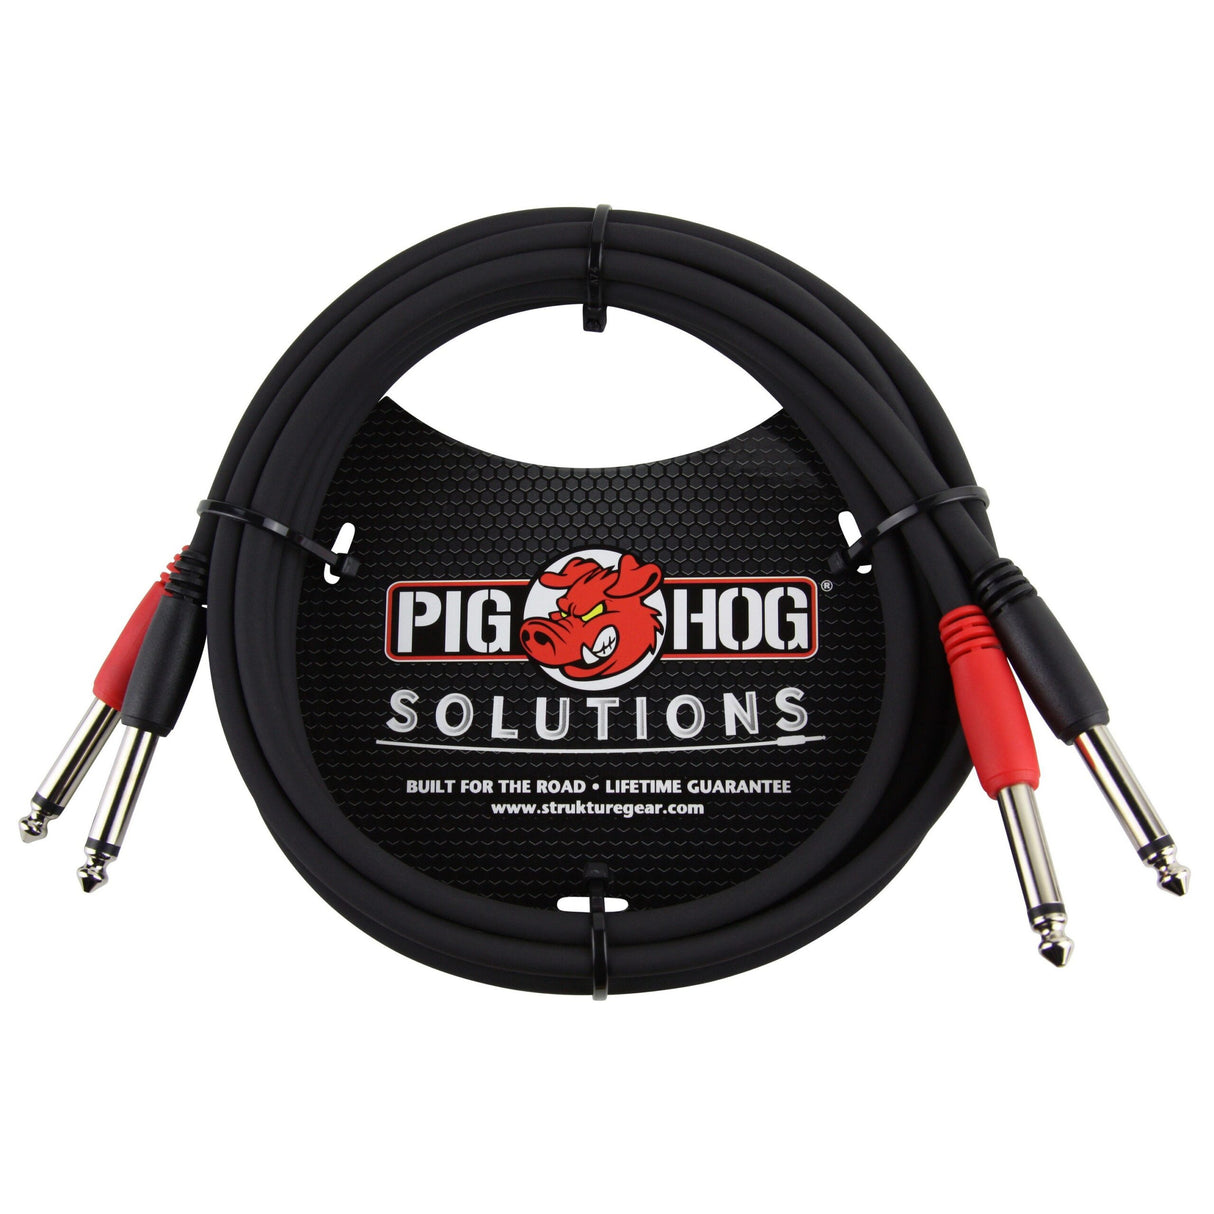 Pig Hog PD-21406 6-Foot 1/4-Inch-1/4-Inch Dual Cable